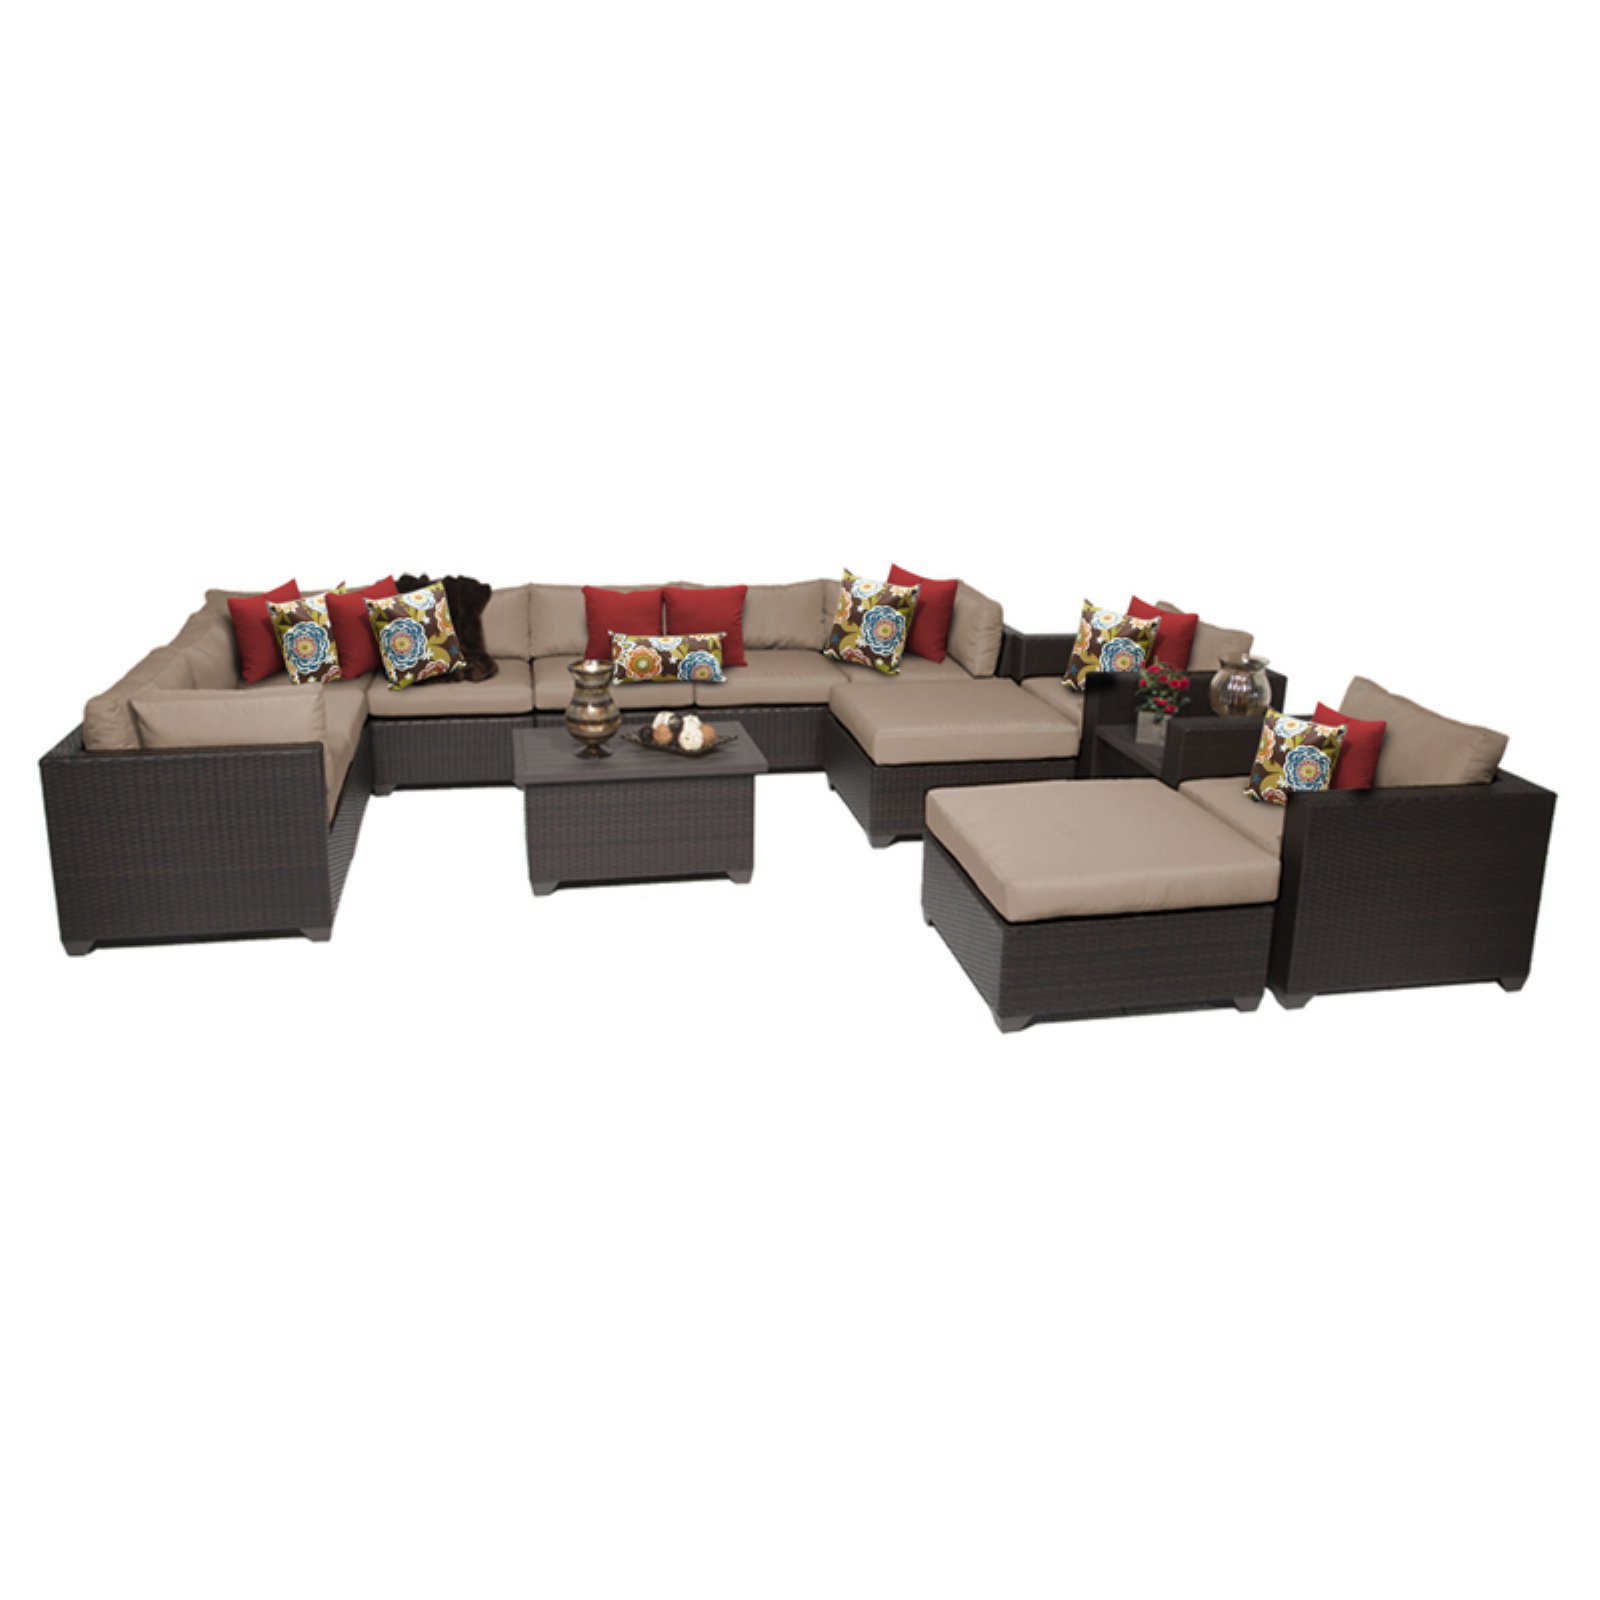 TK Classics Belle Wicker 13 Piece Patio Conversation Set with 2 Sets of Cushion Covers - image 1 of 2